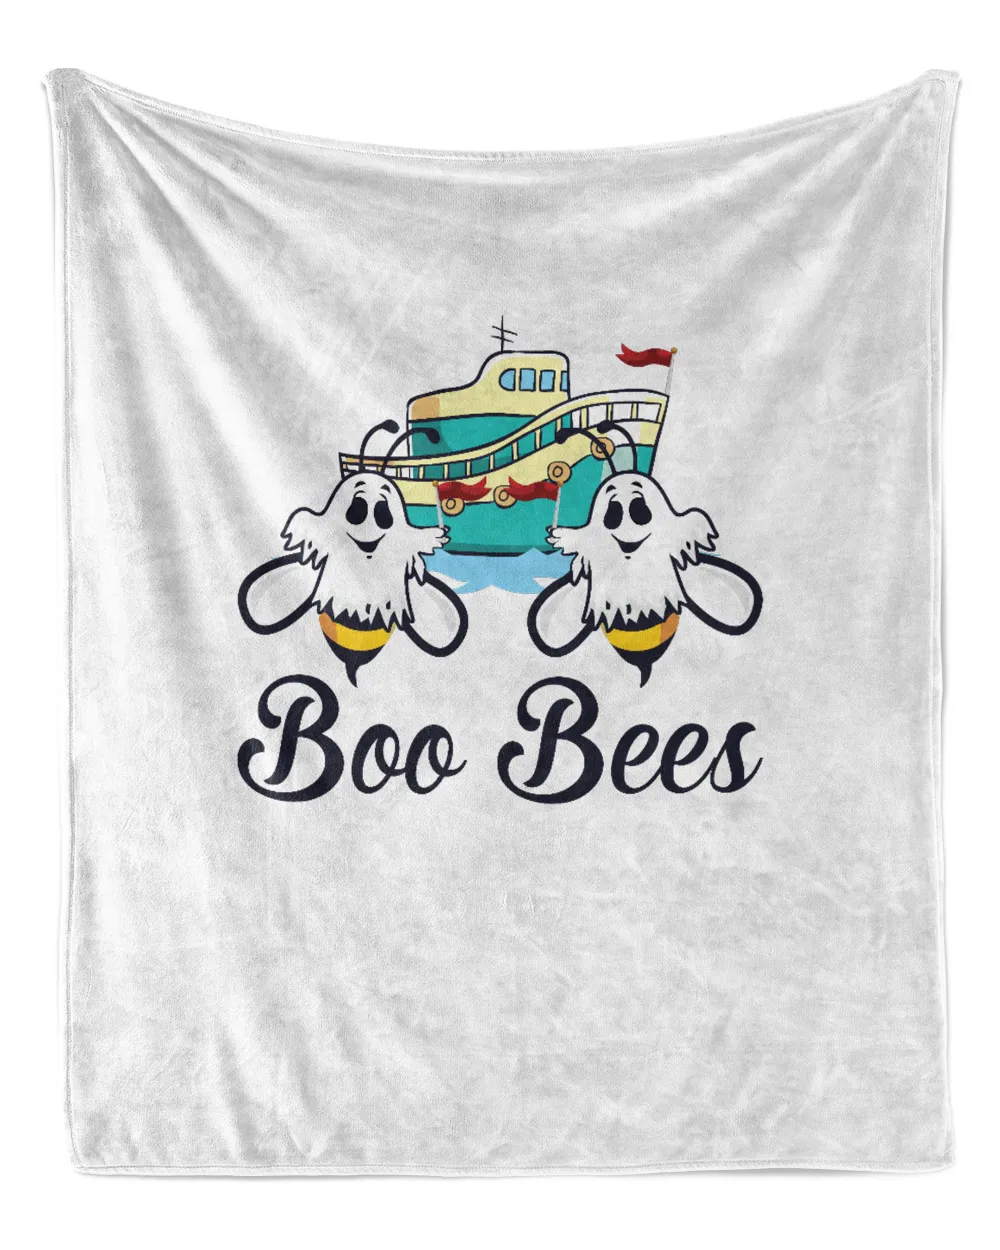 Halloween Boo Bees Cruise Trip Vacation Funny